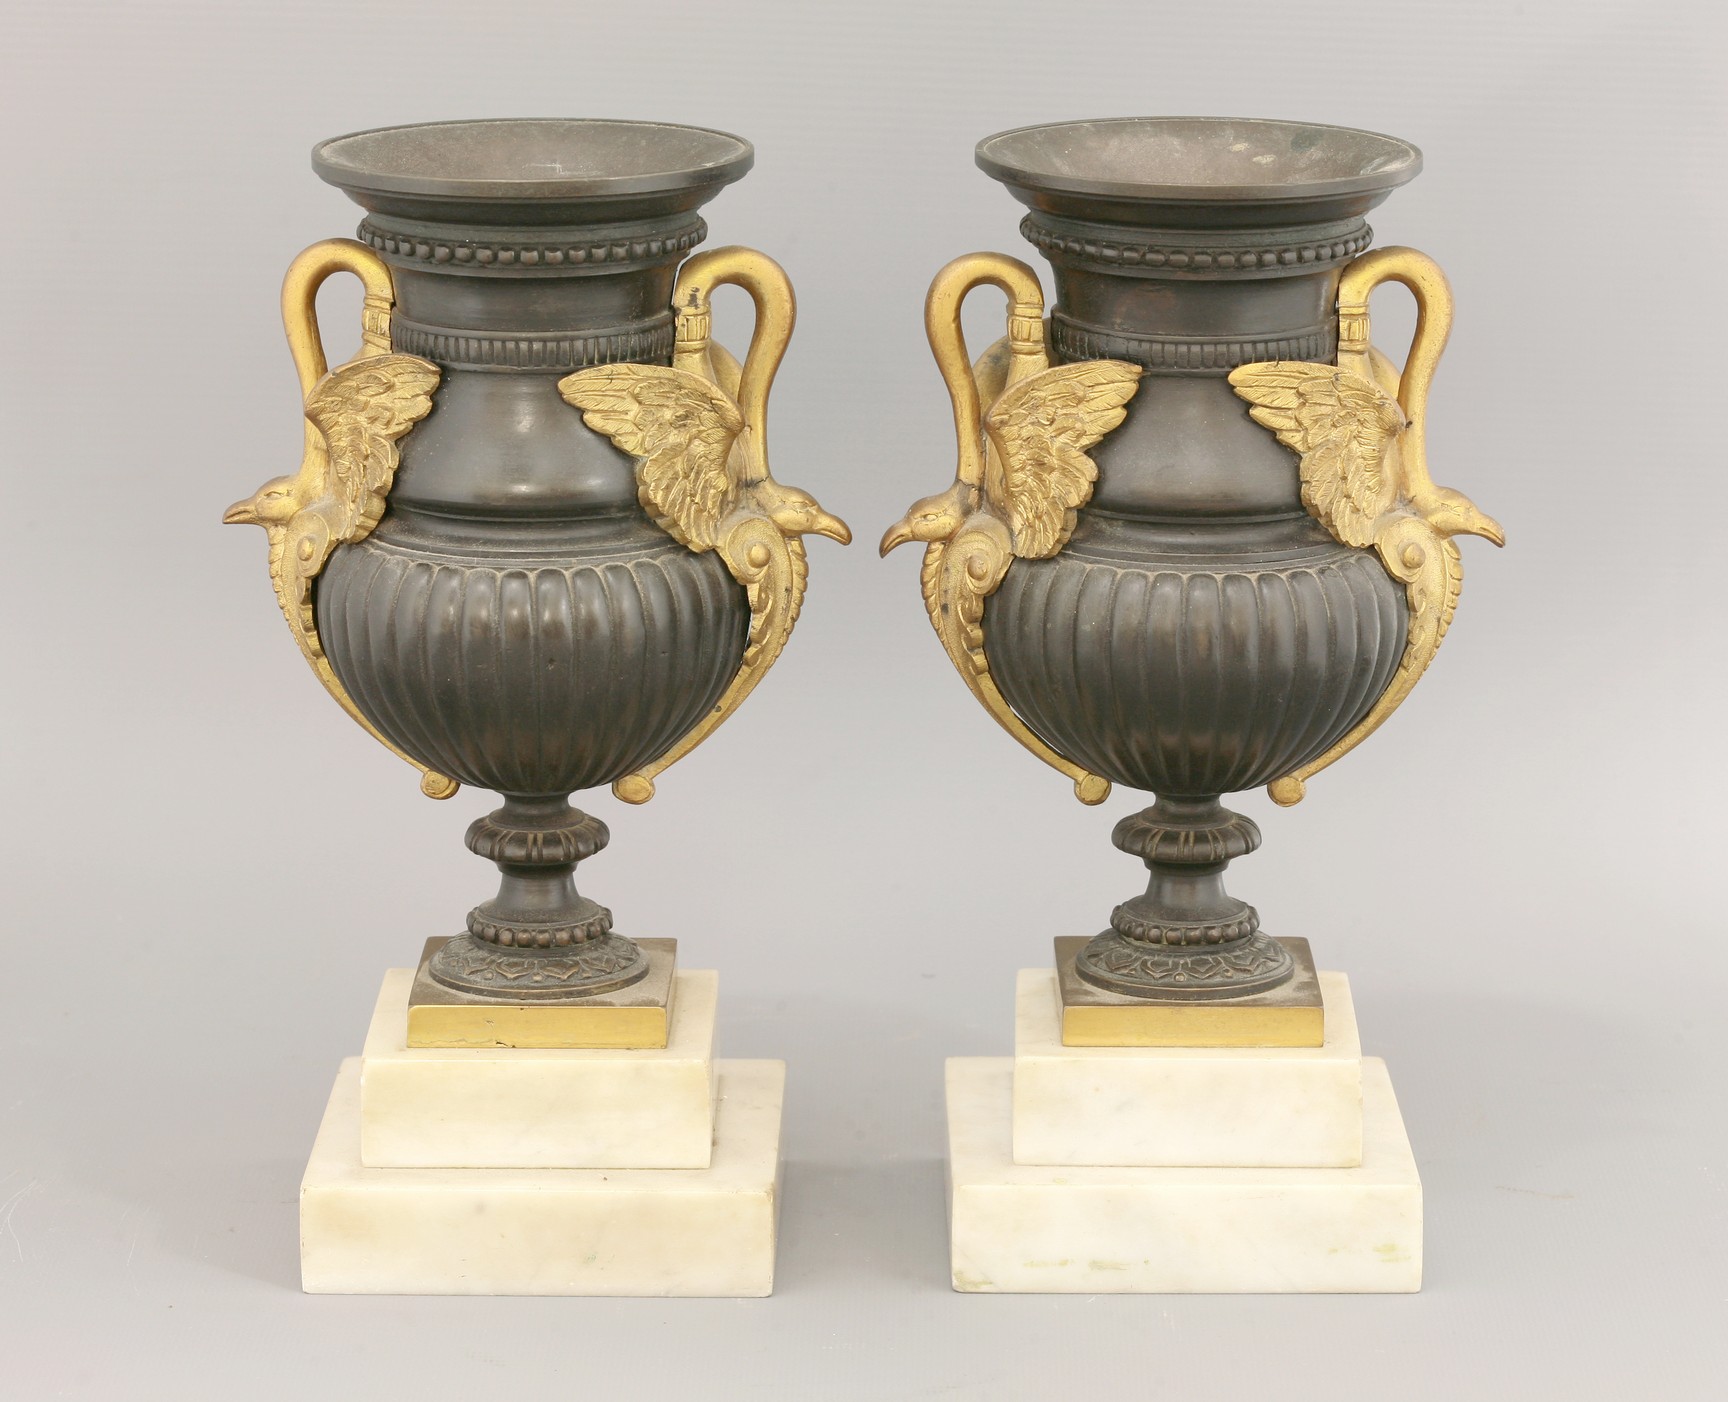 A pair of Empire-style bronze urn vases, 
with ormolu handles modelled as swans, upon stepped marble